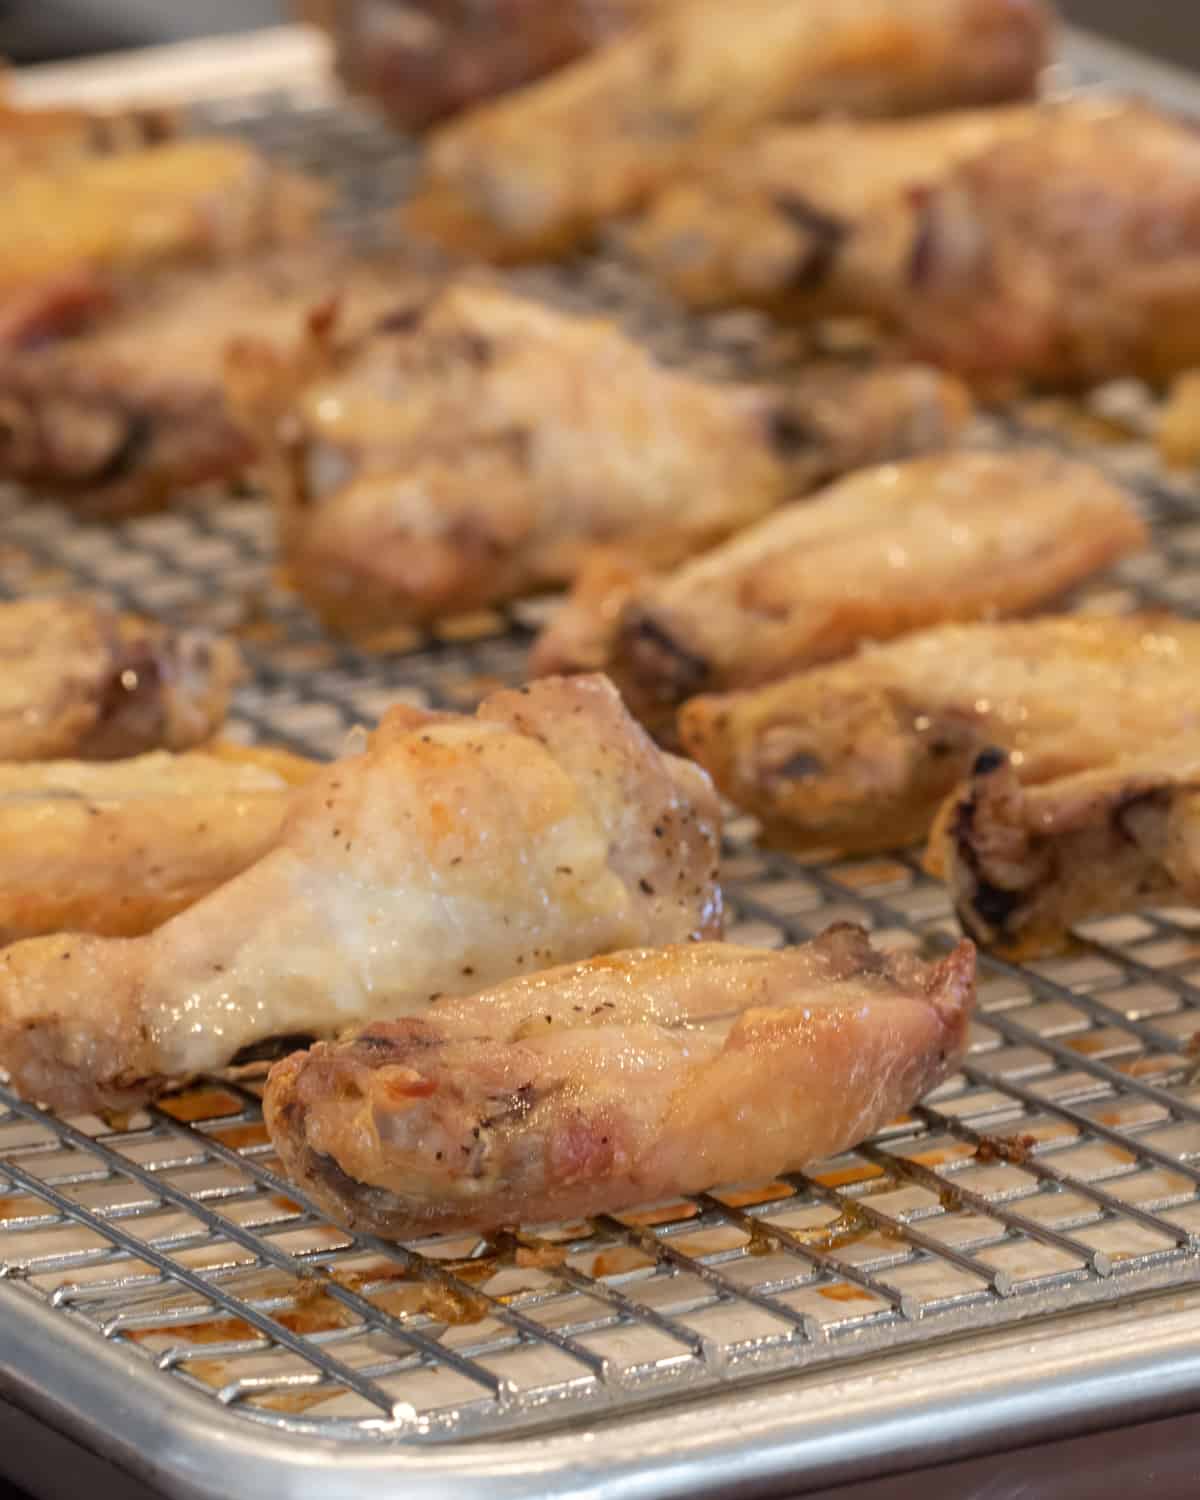 Cooked chicken wings on a baking sheet.